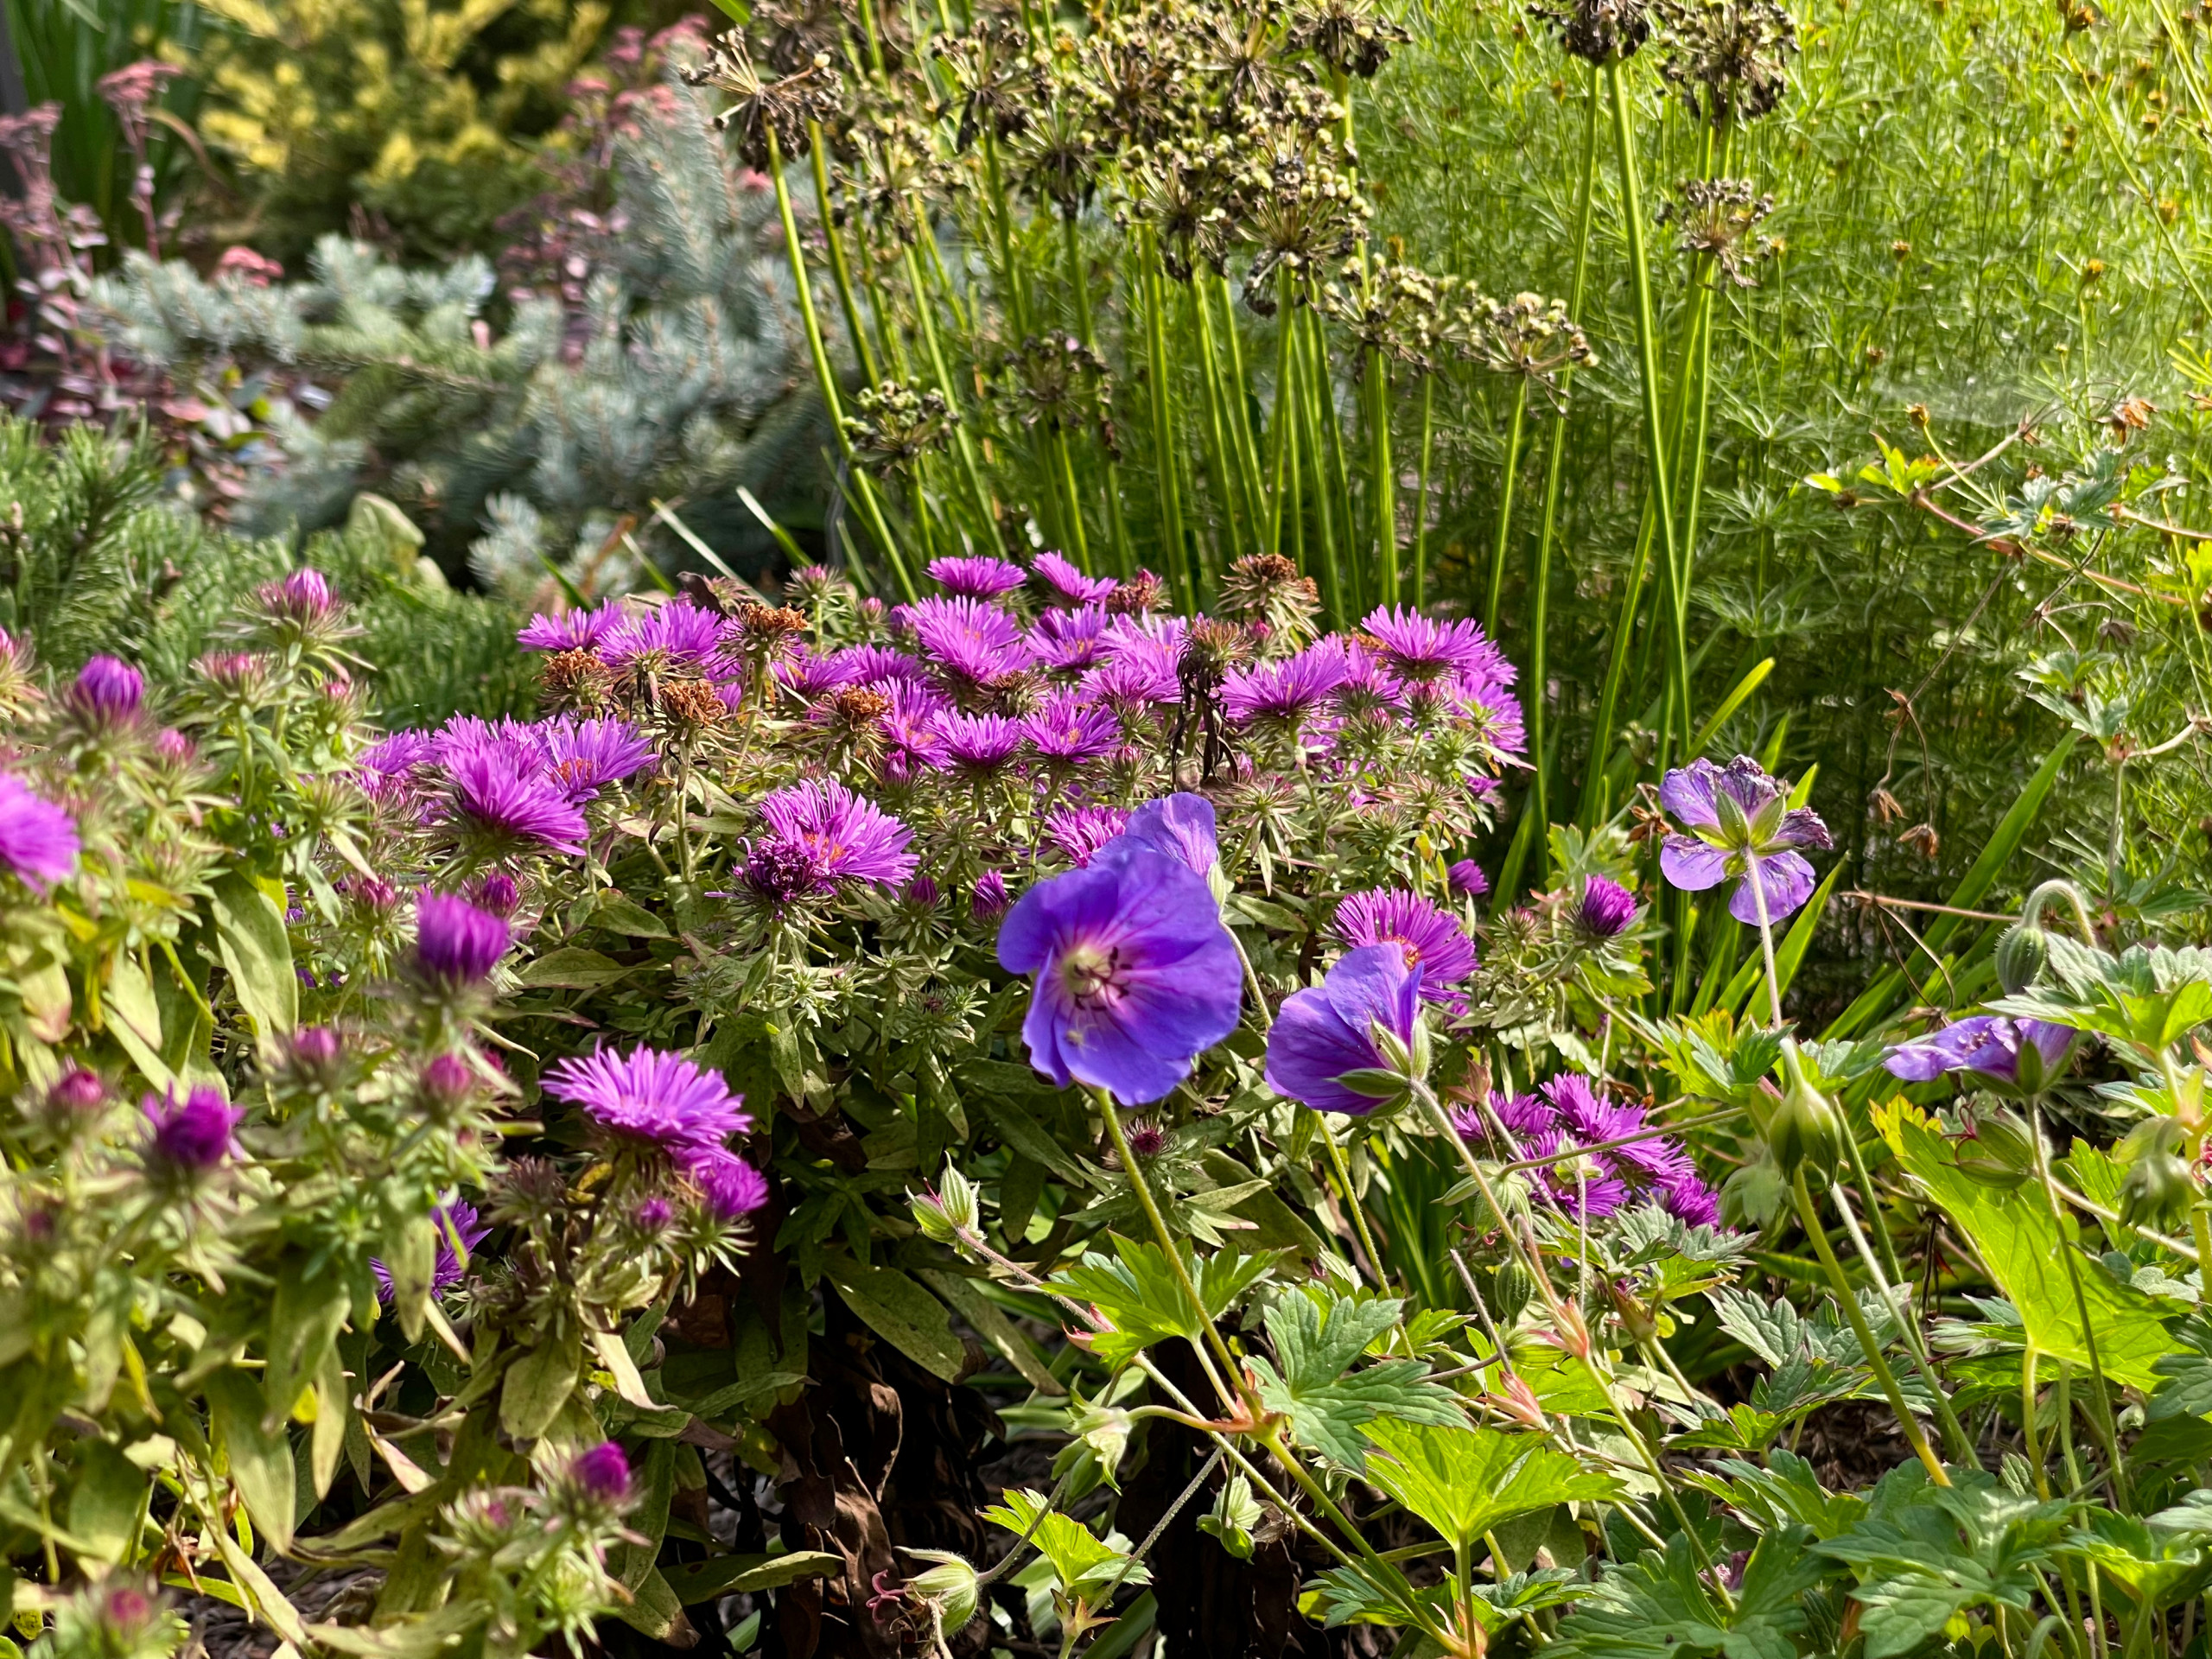 'Rozanne' geranium and 'Purple Dome' asters